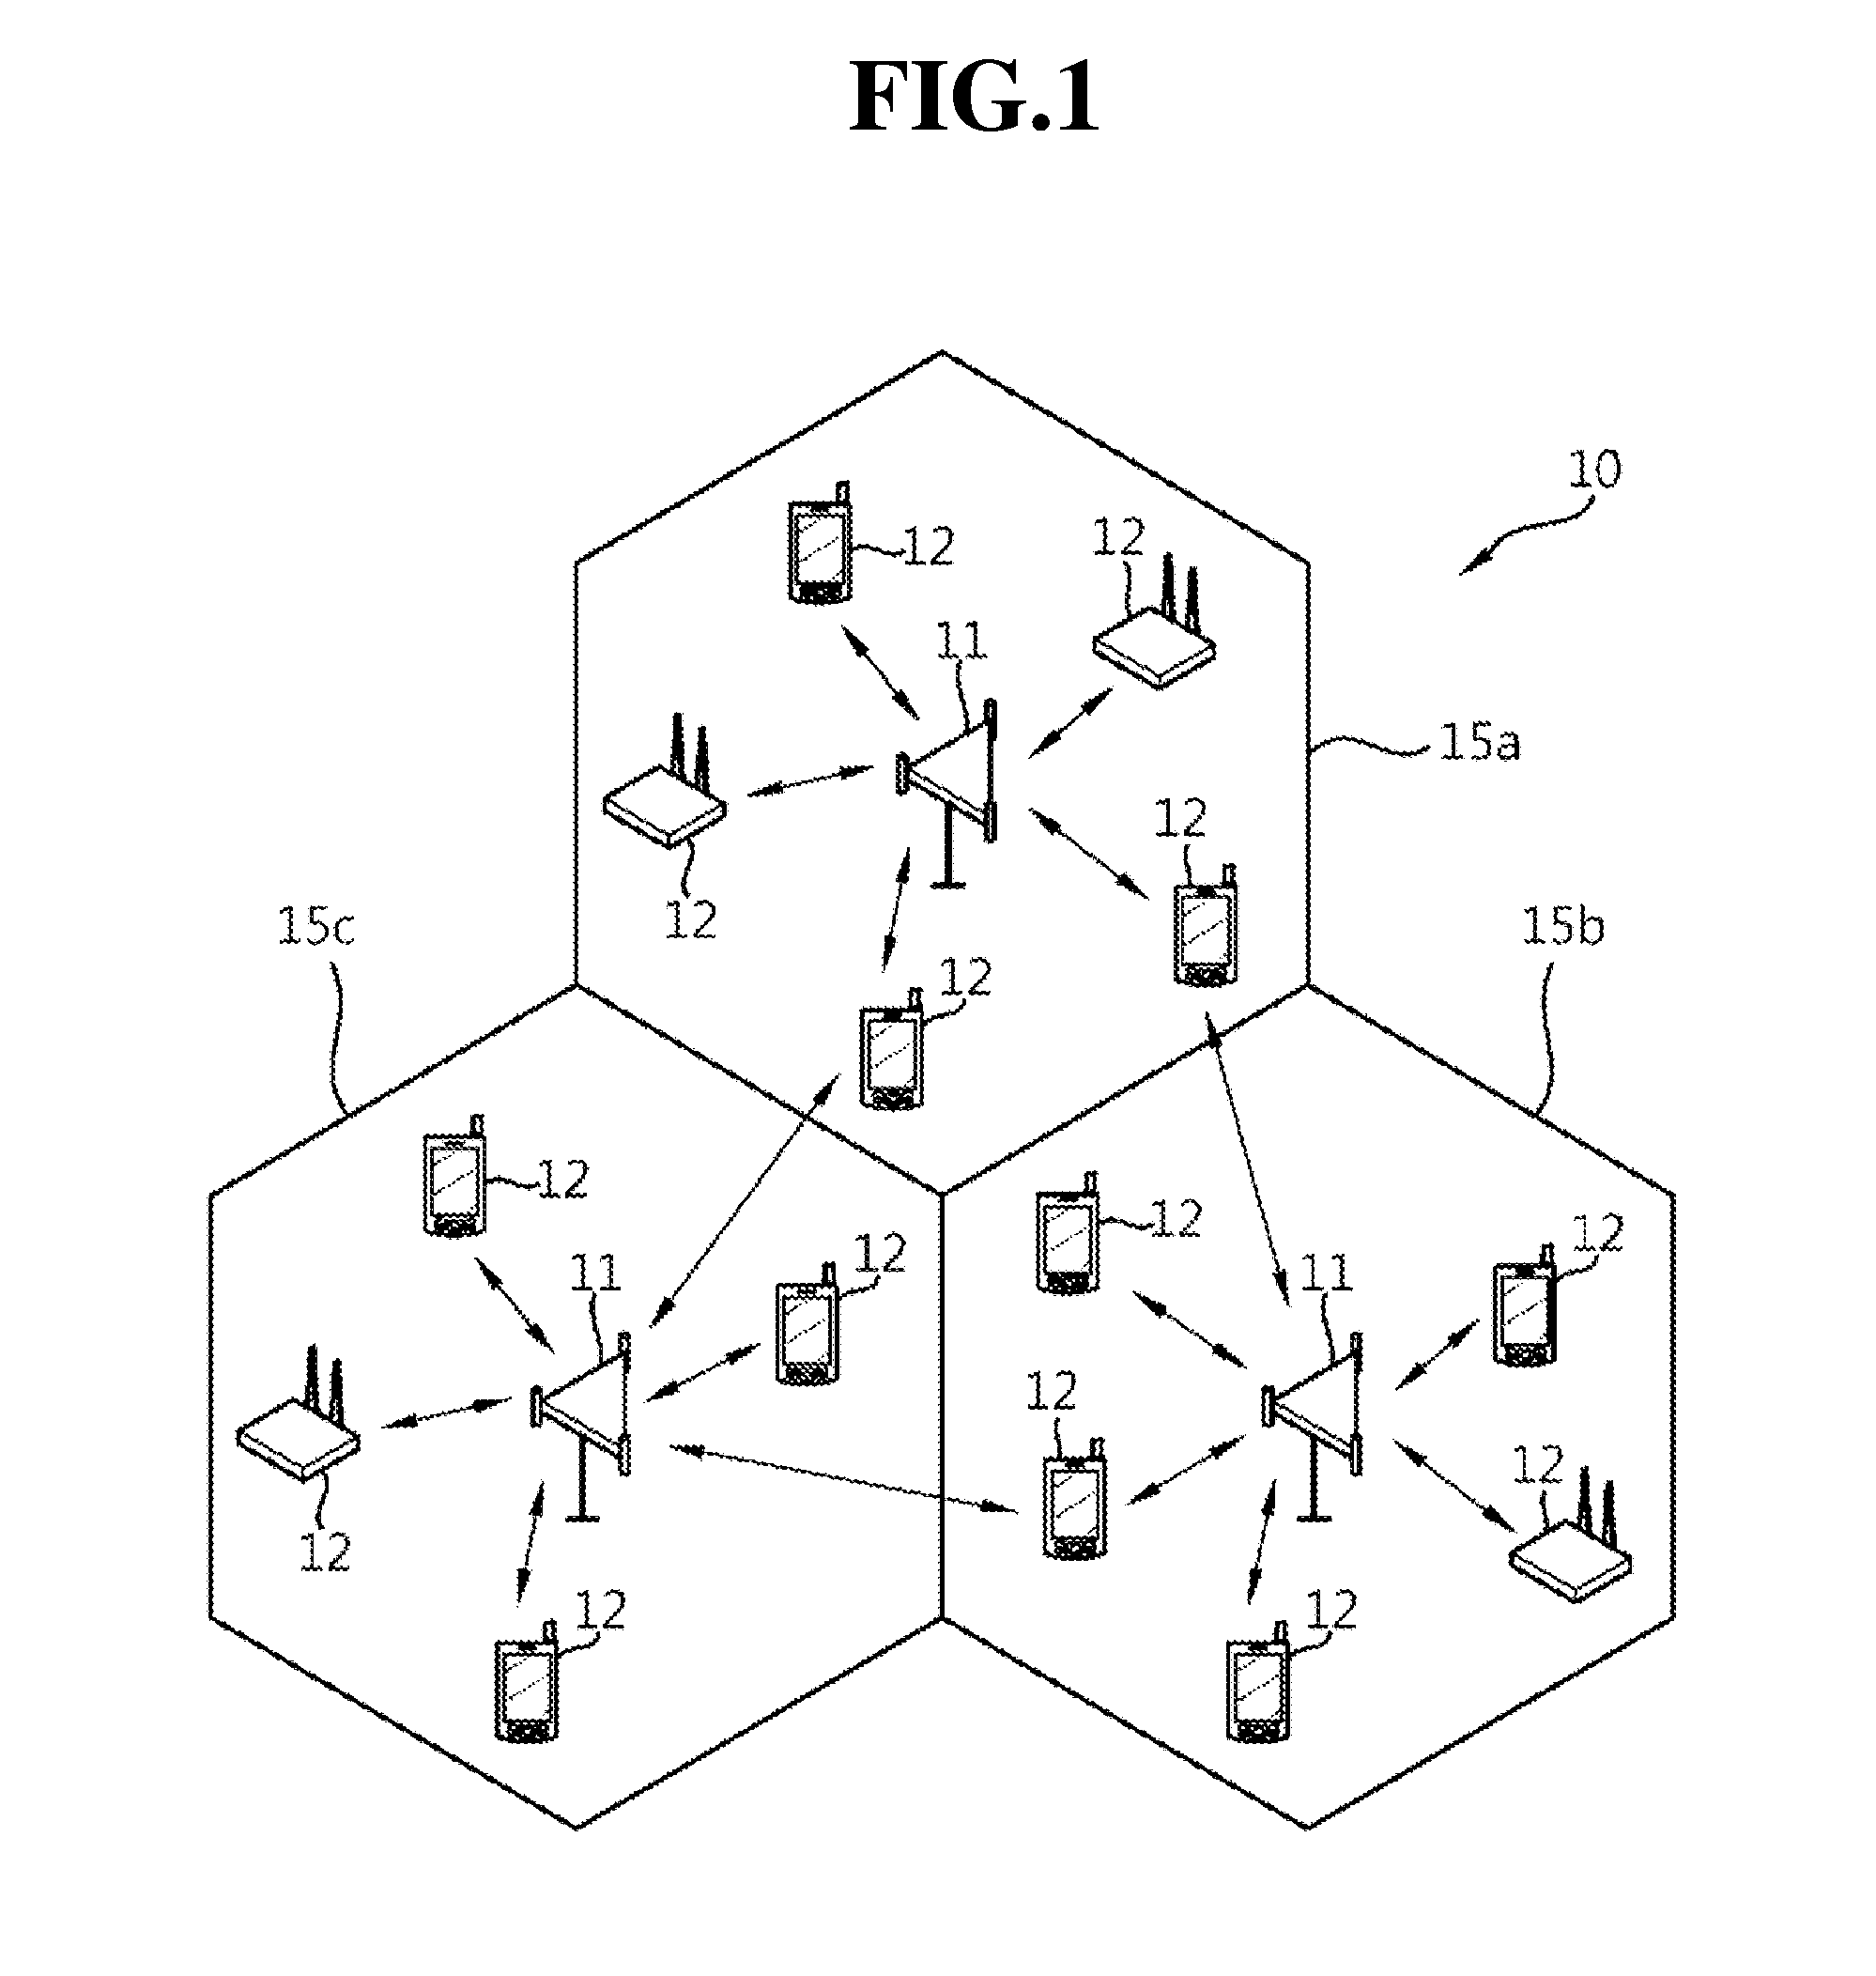 Method of determining sub frame in wireless communication system